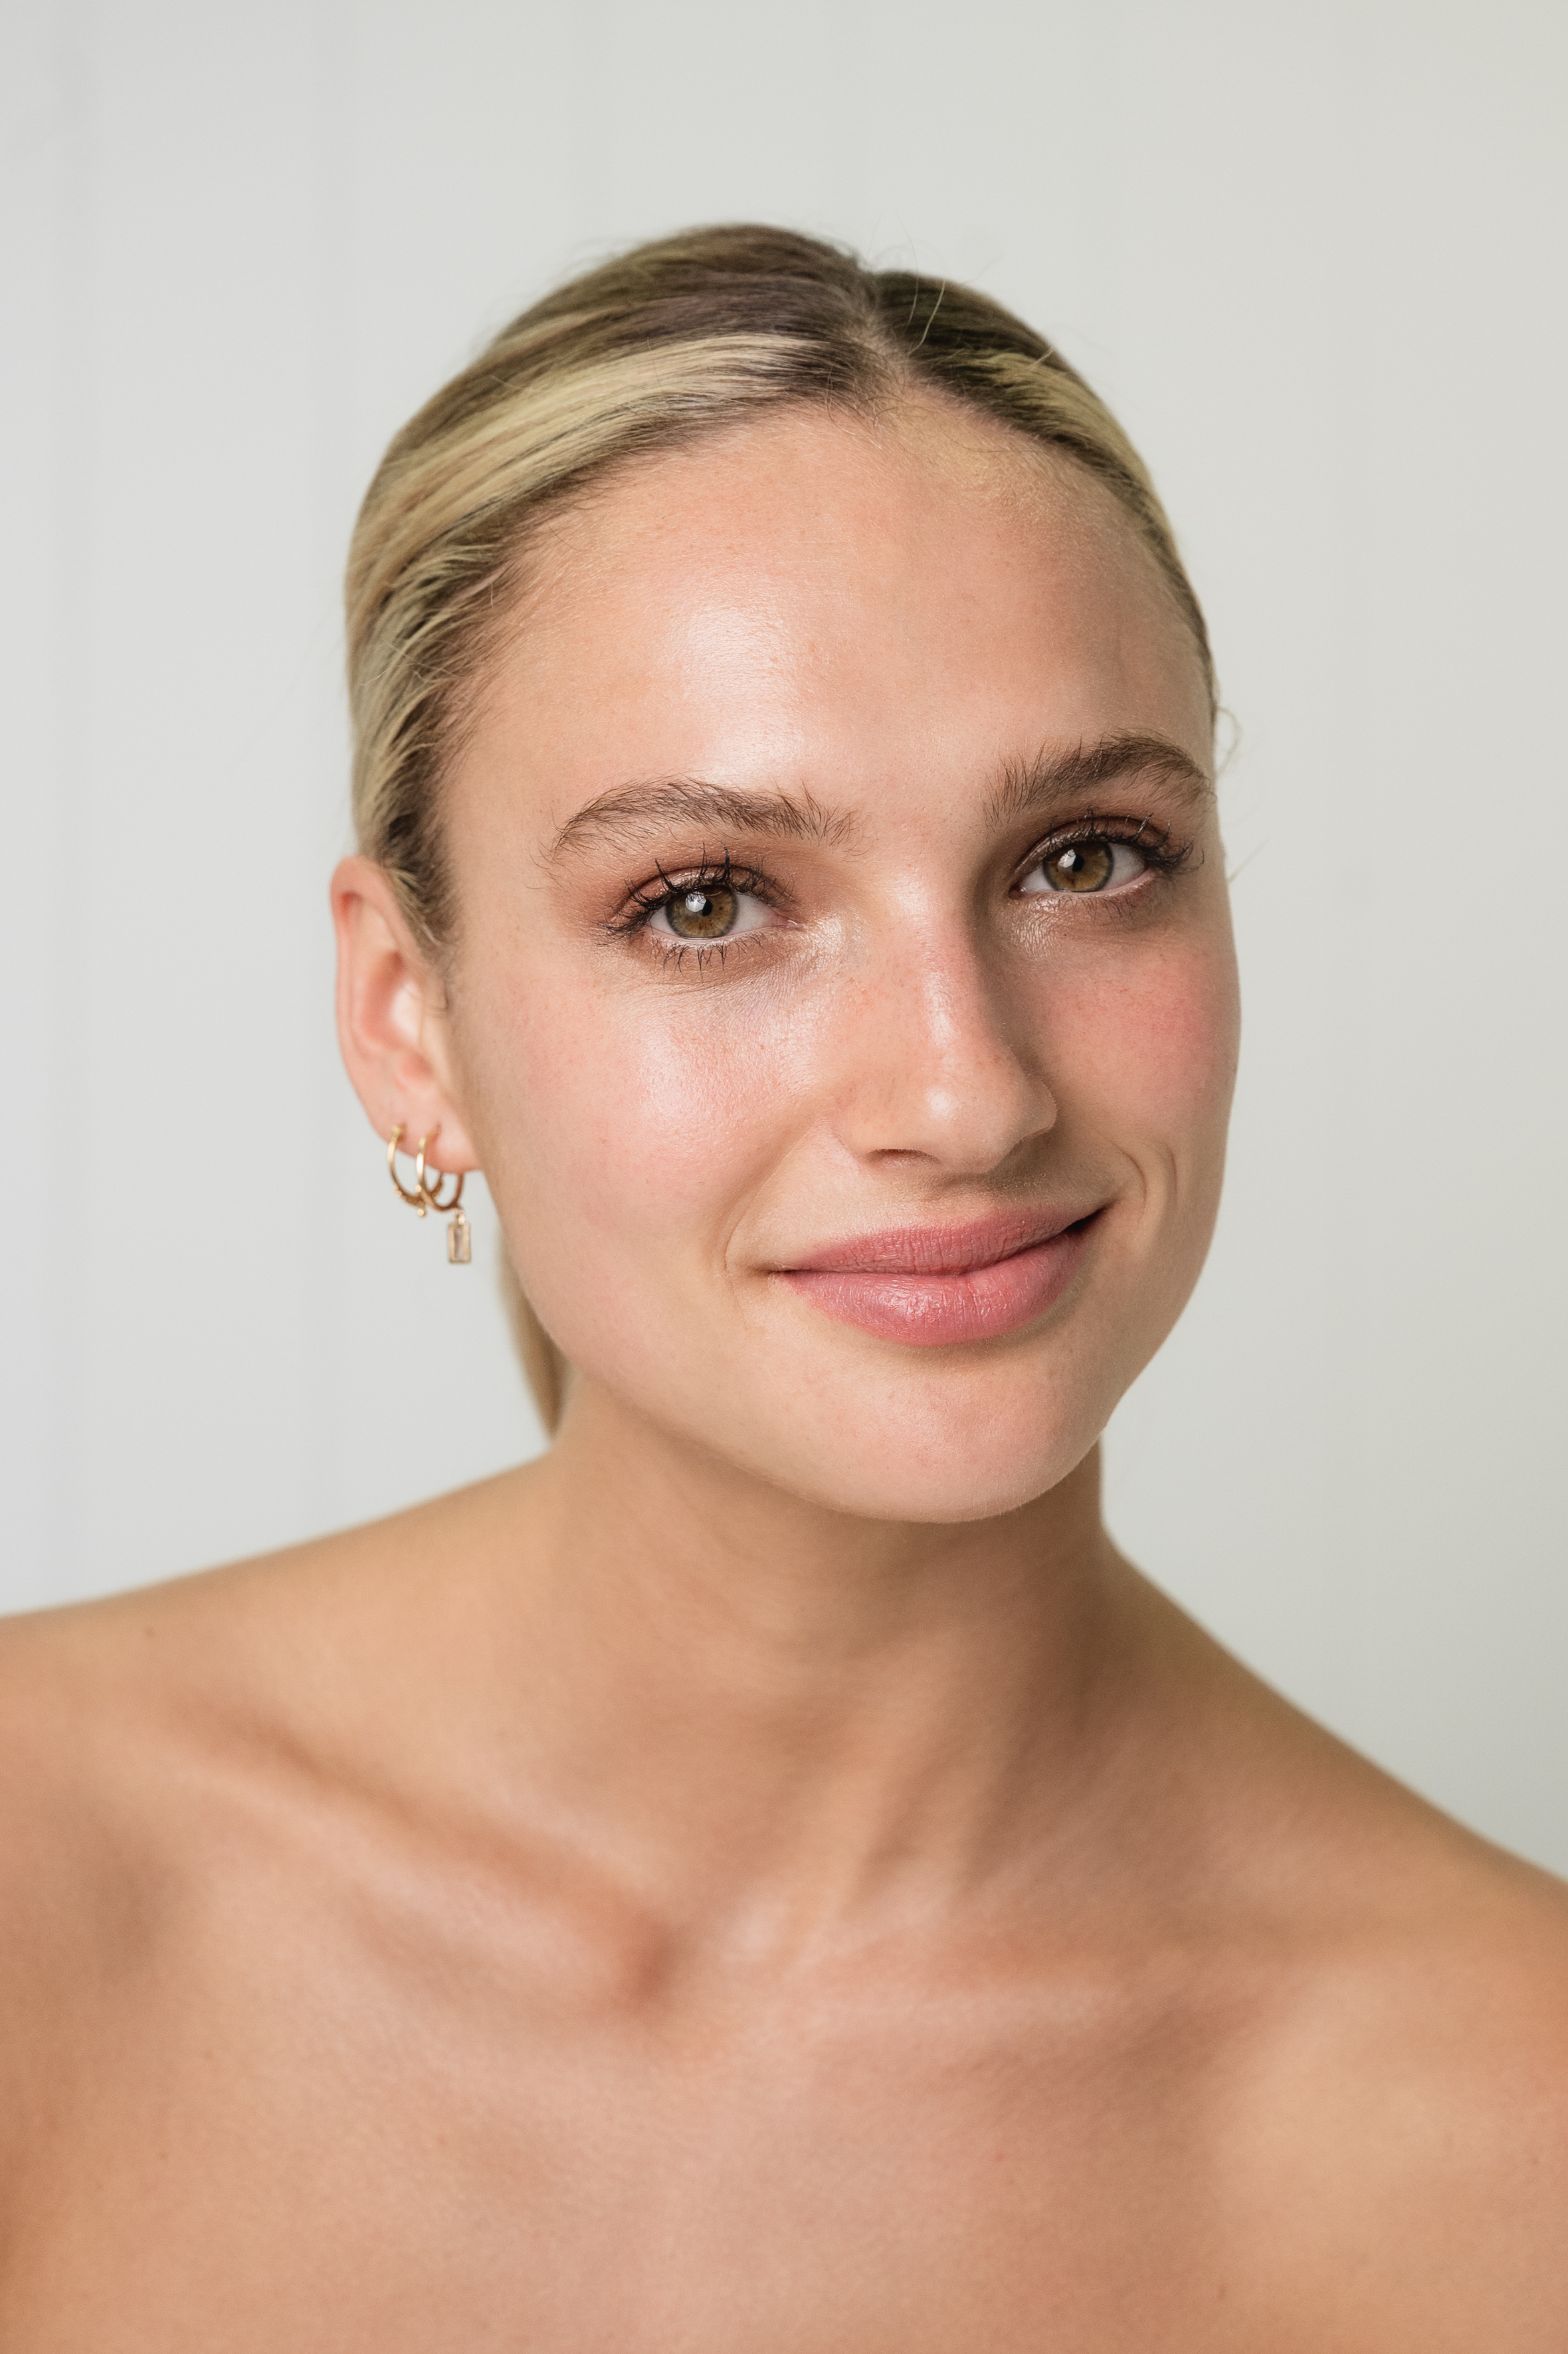 Woman with great skin after an Express Peel at The Clinic Bondi